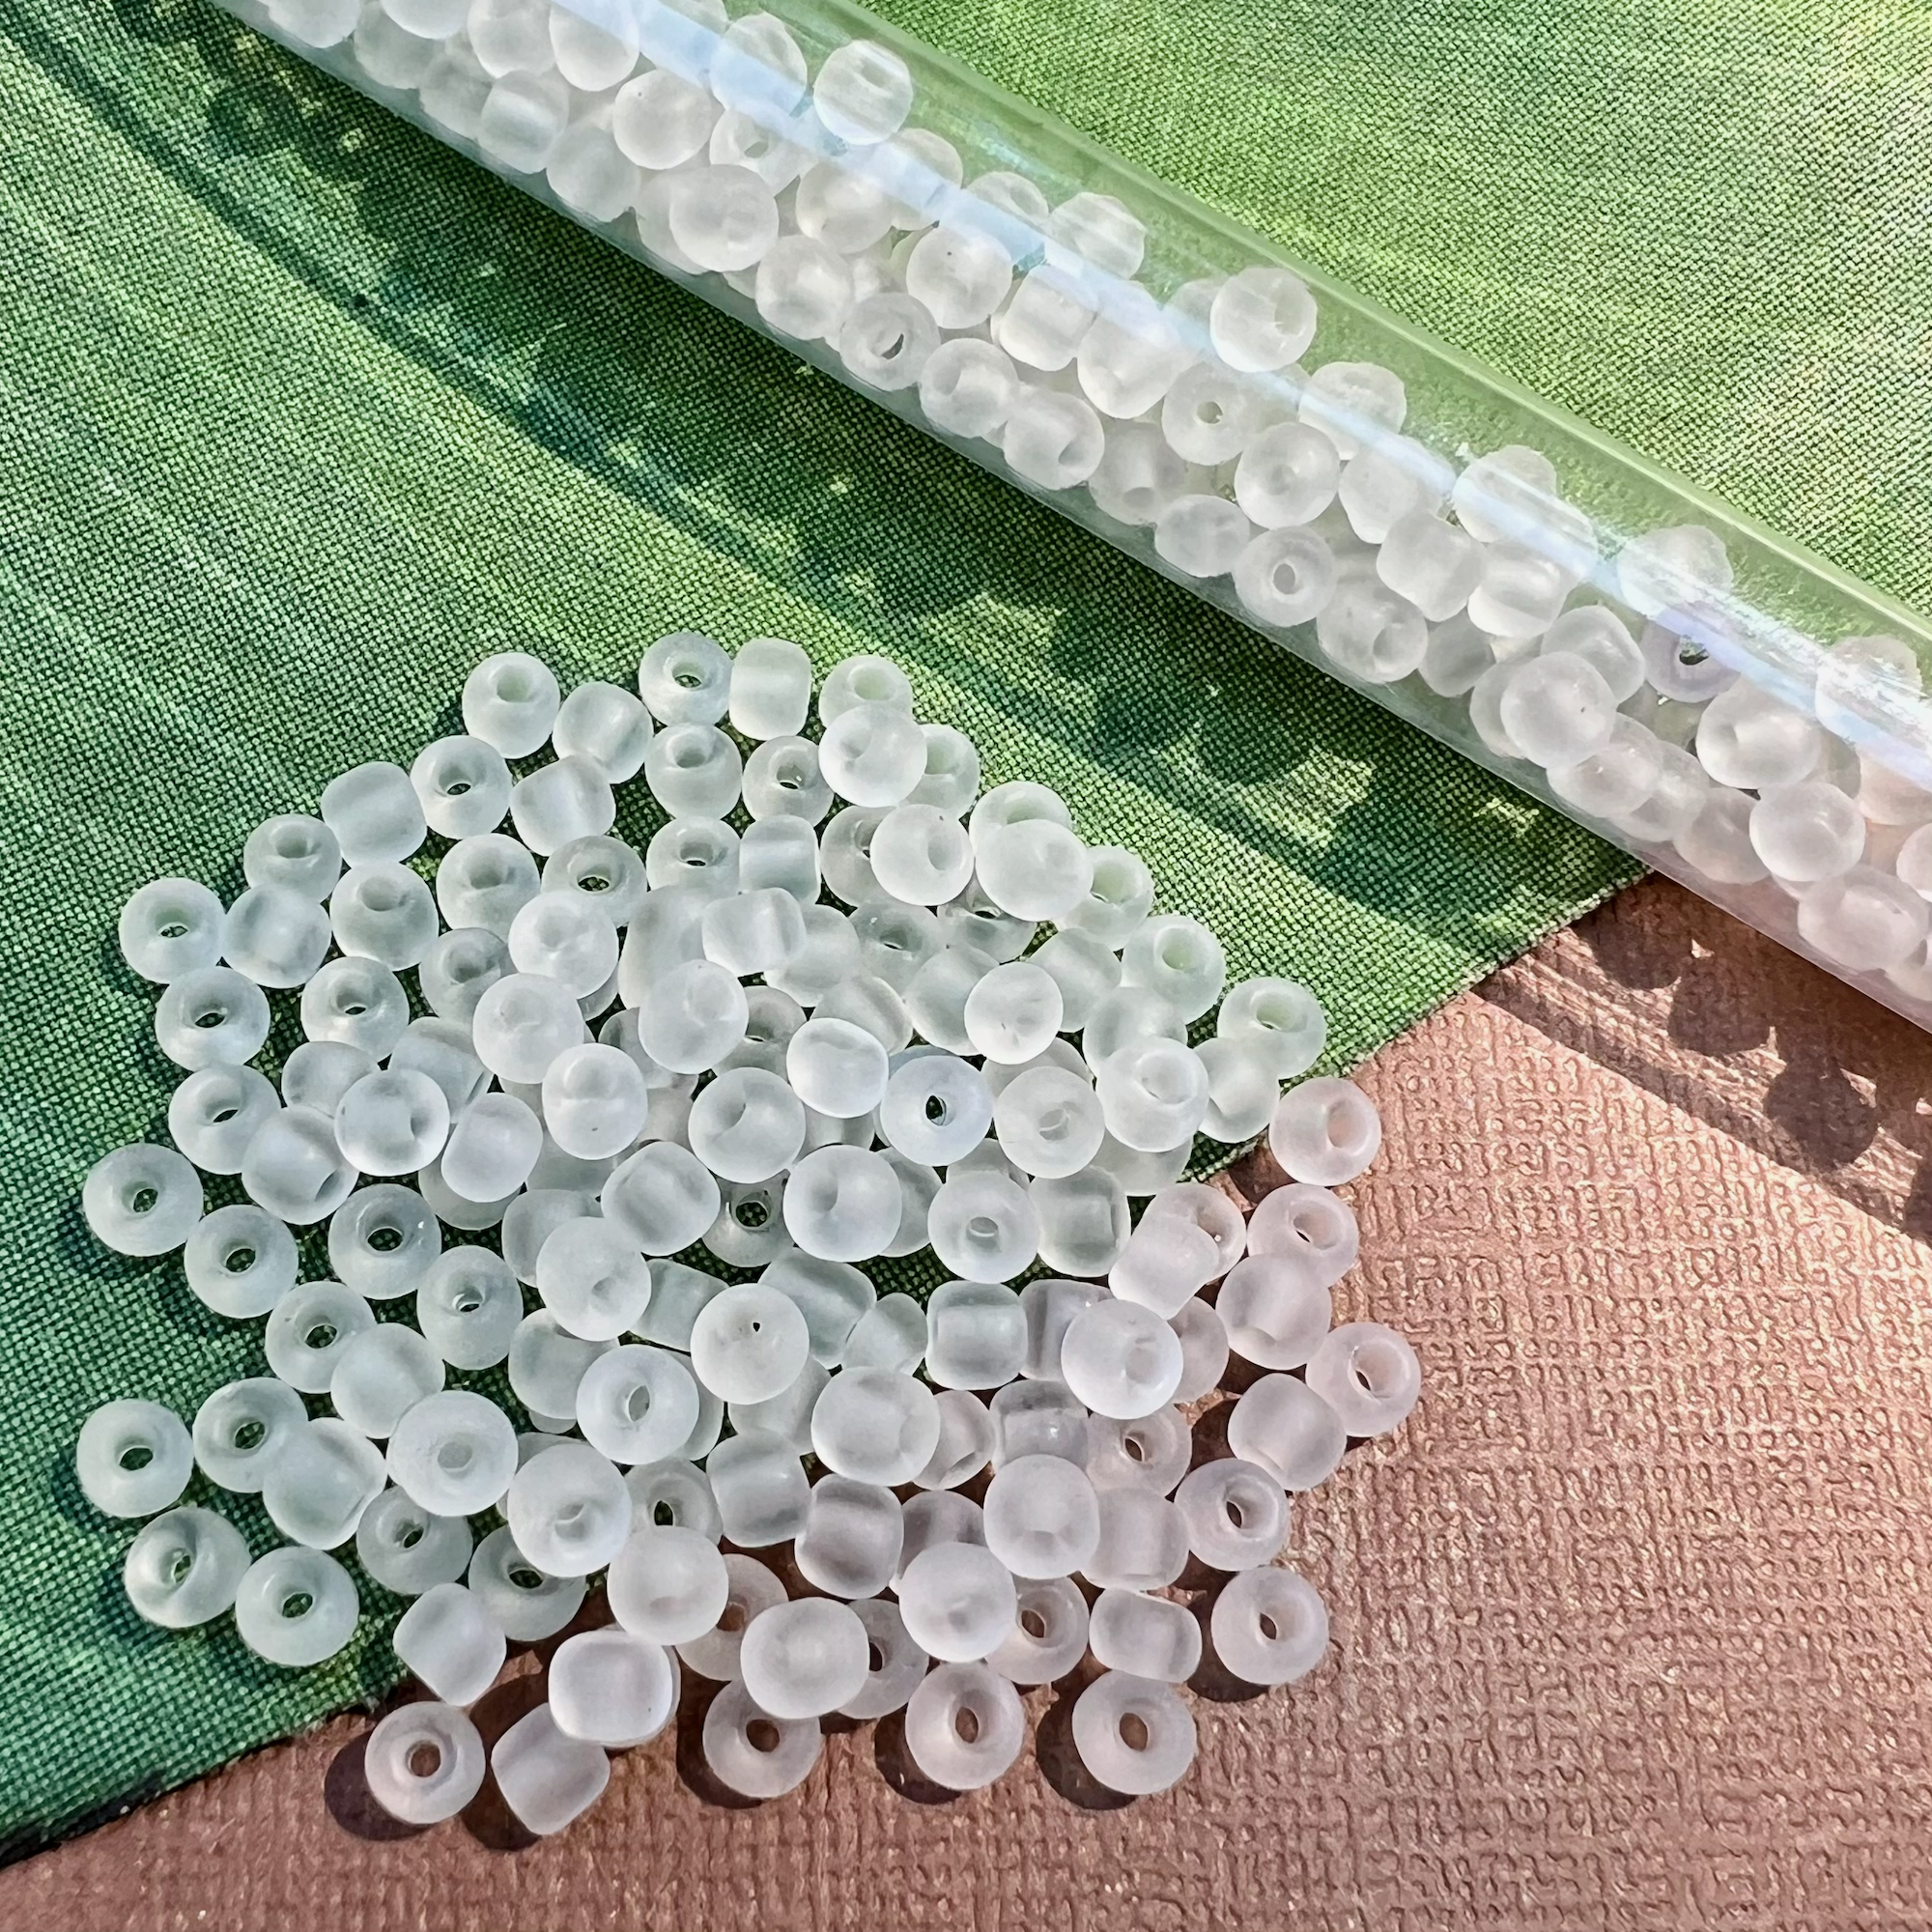 Frosted White Size 6 Seed Beads - 30 Grams